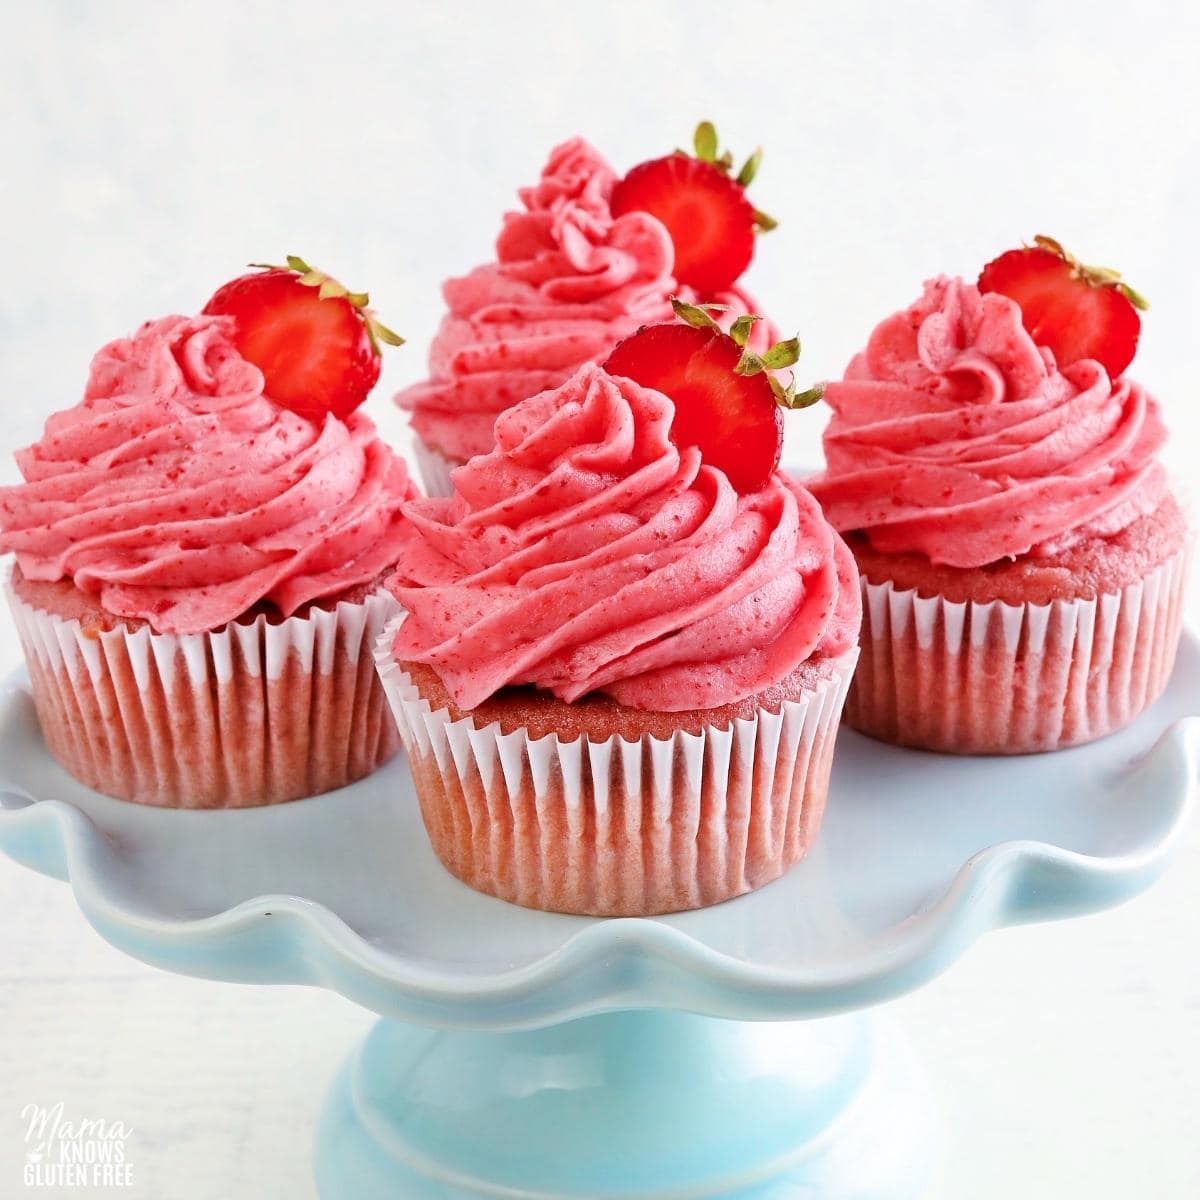 Strawberry Cupcakes with Strawberry Buttercream Frosting {Gluten-Free, Dairy-Free Option} - Mama Knows Gluten Free